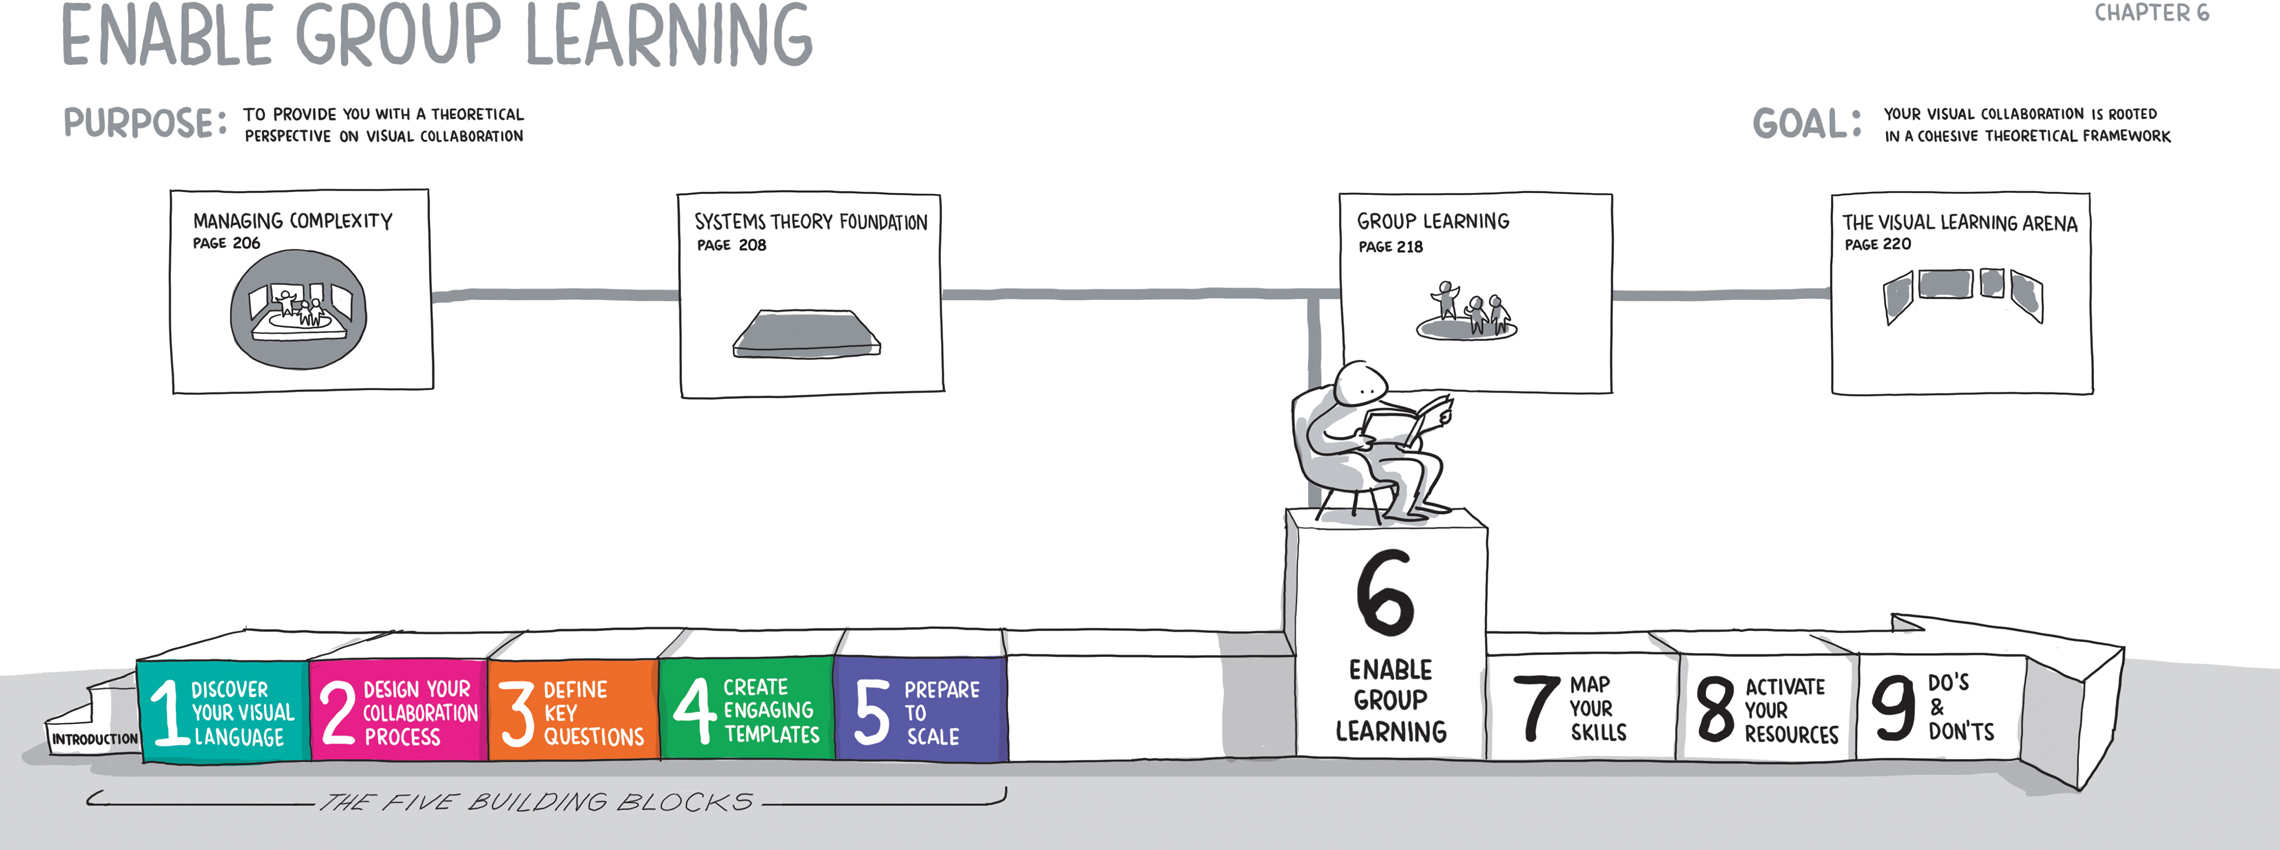 Cartoon image of five blocks placed side to side, along with an image each representative of them drawn above them. These blocks are together labeled “the five building blocks,” and are individually labeled the following, from left to right: (1) discover your visual language, (2) design your collaboration process, (3) define key questions, (4) create engaging templates, and (5) prepare to scale., (6) enable group learning, (7) map your skills, (8) activate your resources, and (9) Do's and Don'ts. Drawn above these are posters with related images with the following text: managing complexity, systems theory foundation, group learning, and the visual learning arena.